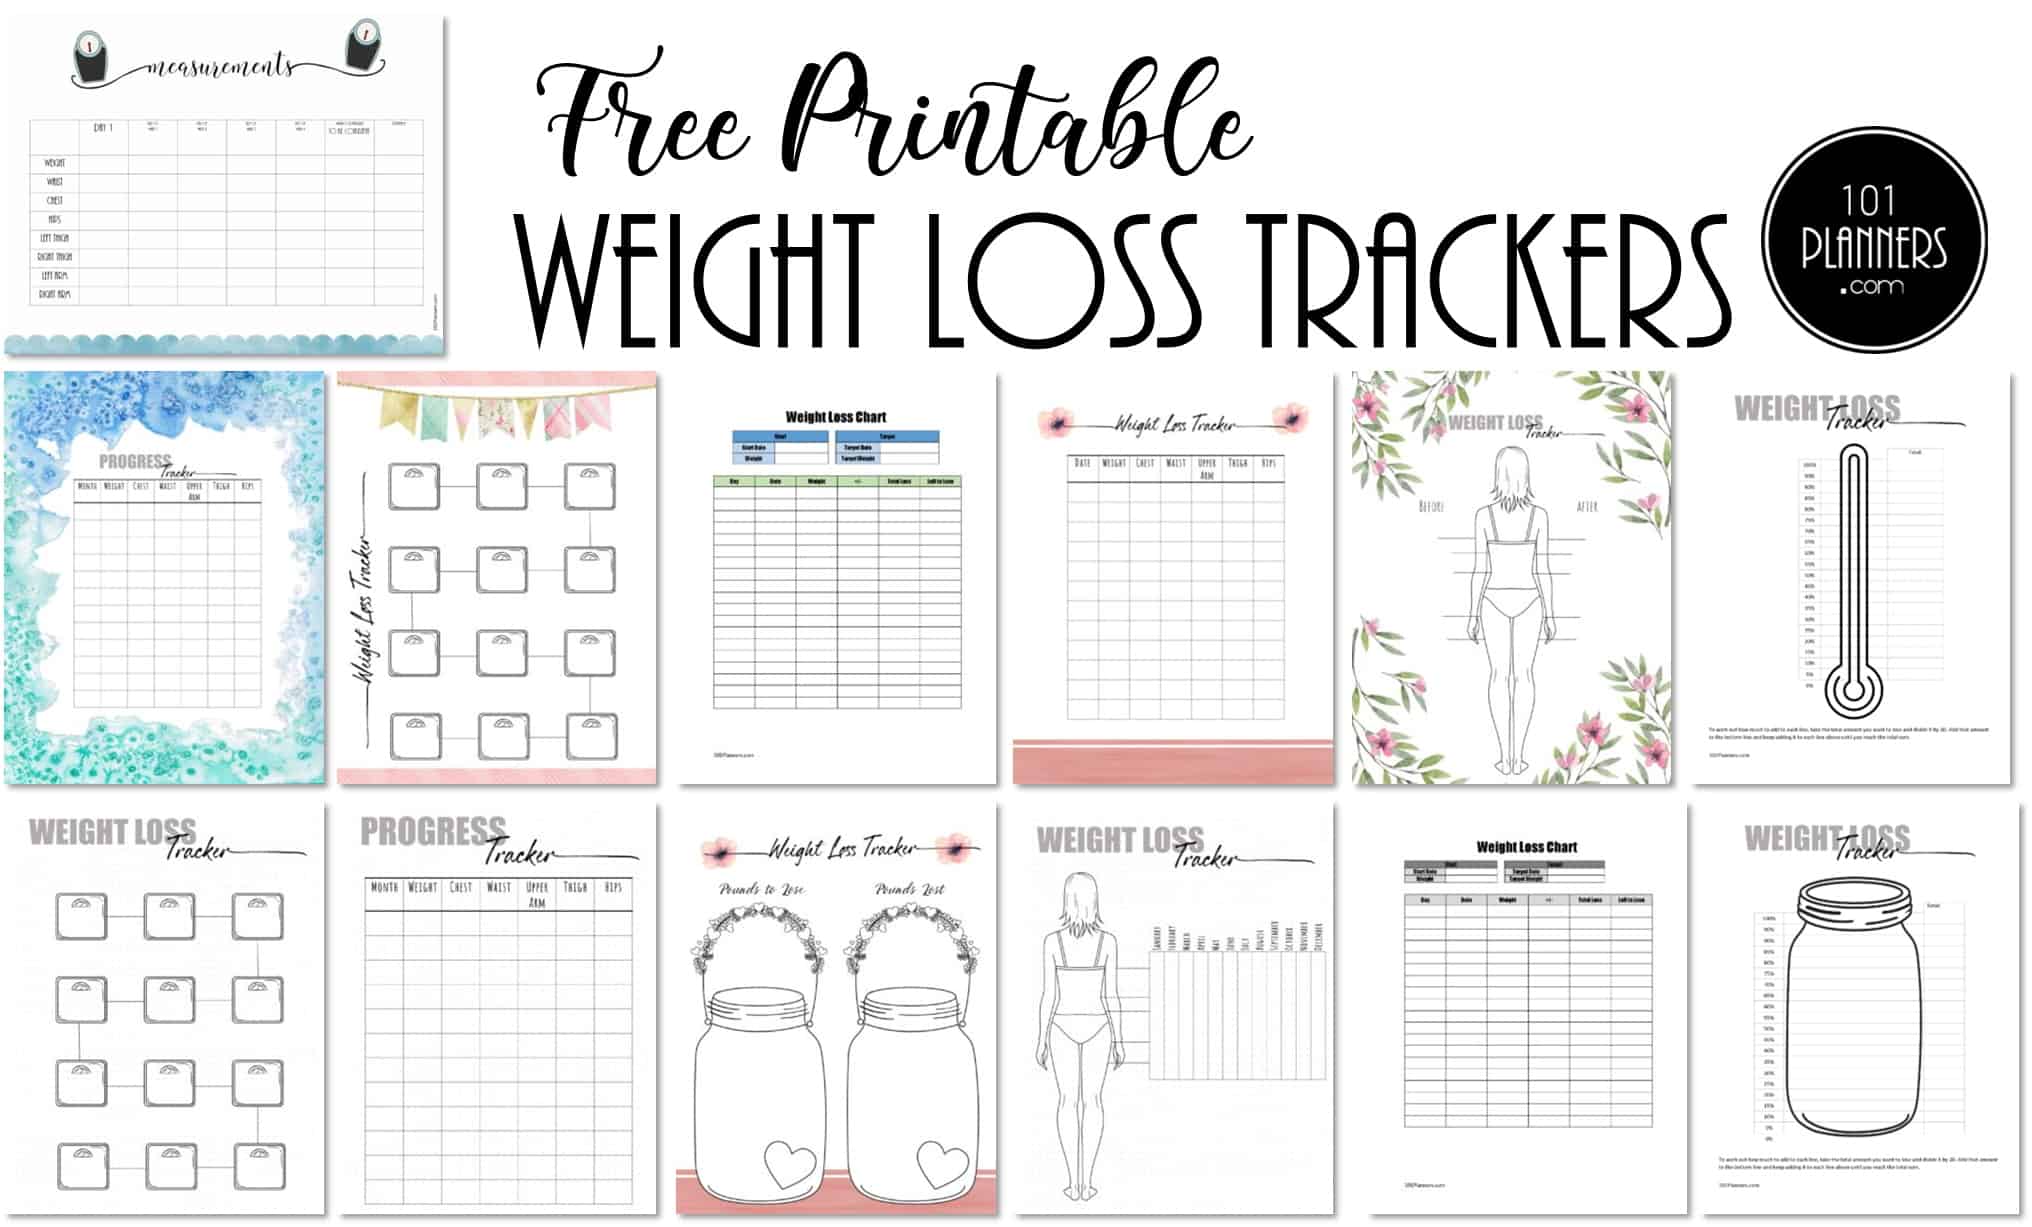 https://www.101planners.com/wp-content/uploads/2020/05/weight-loss-tracker-printables.jpg